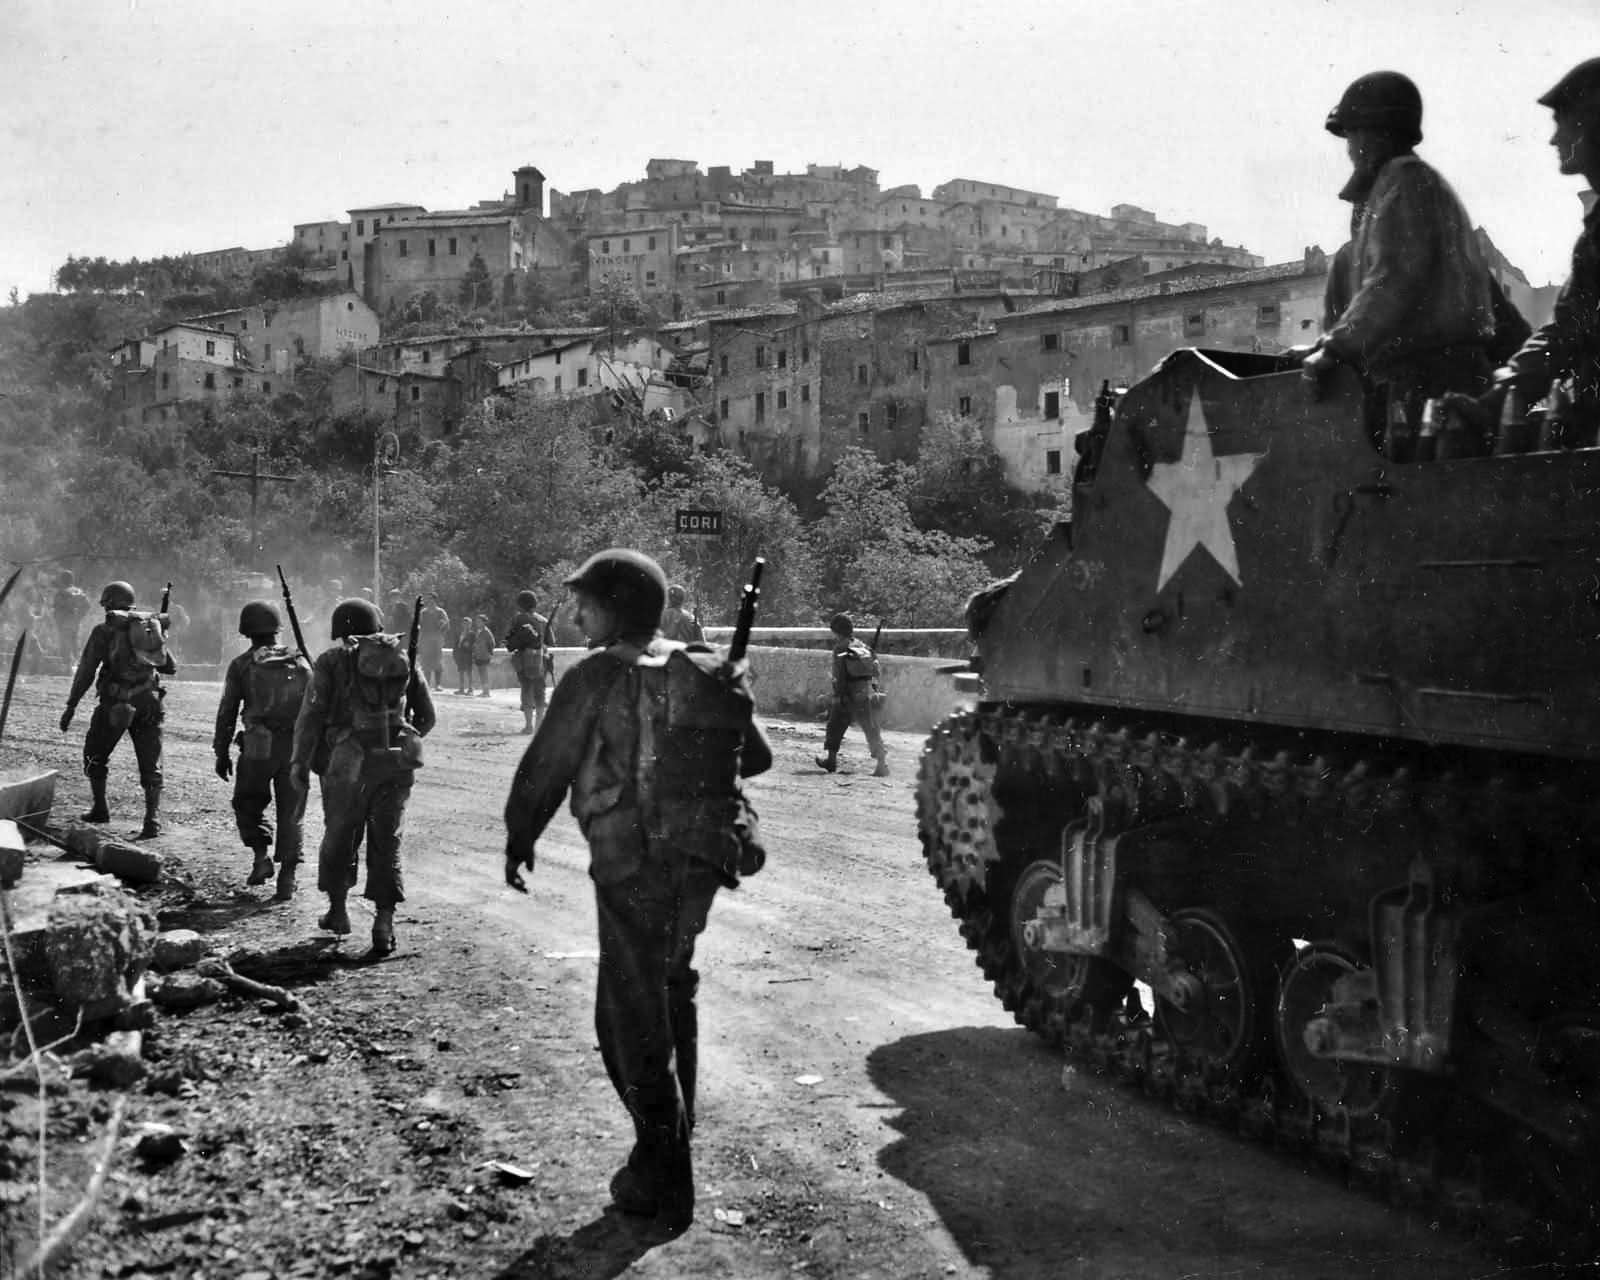 A self-propelled M7 “Priest” assault weapon mounting a 105mm howitzer pauses along a road near the town of Cori, south of Rome, as American soldiers stream past toward the Eternal City.